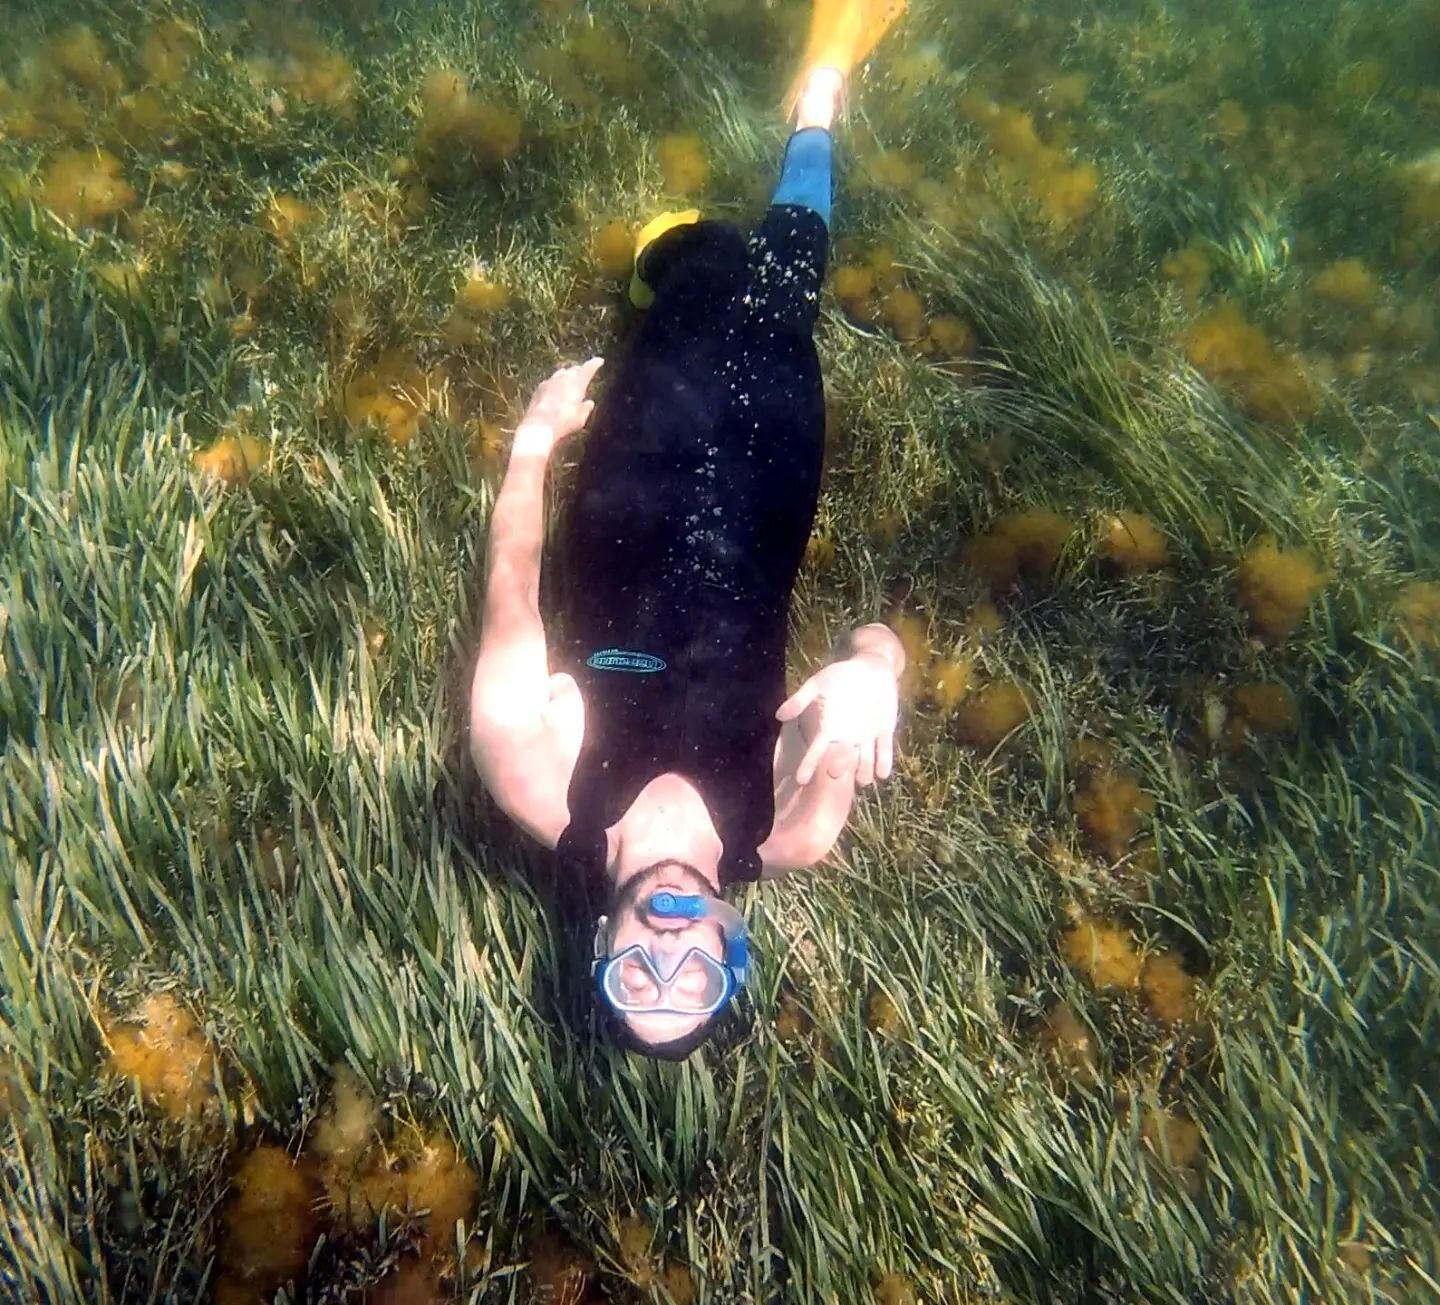 👩&zwj;🦰 Aaron swimming in the backyard thanks to all the rain we've been having lately. 🏊&zwj;♂️ 

... not really though, this was from when we tried to scuba at Rottnest and there were 2 tiger sharks so we boated over to Carnac Island where the s